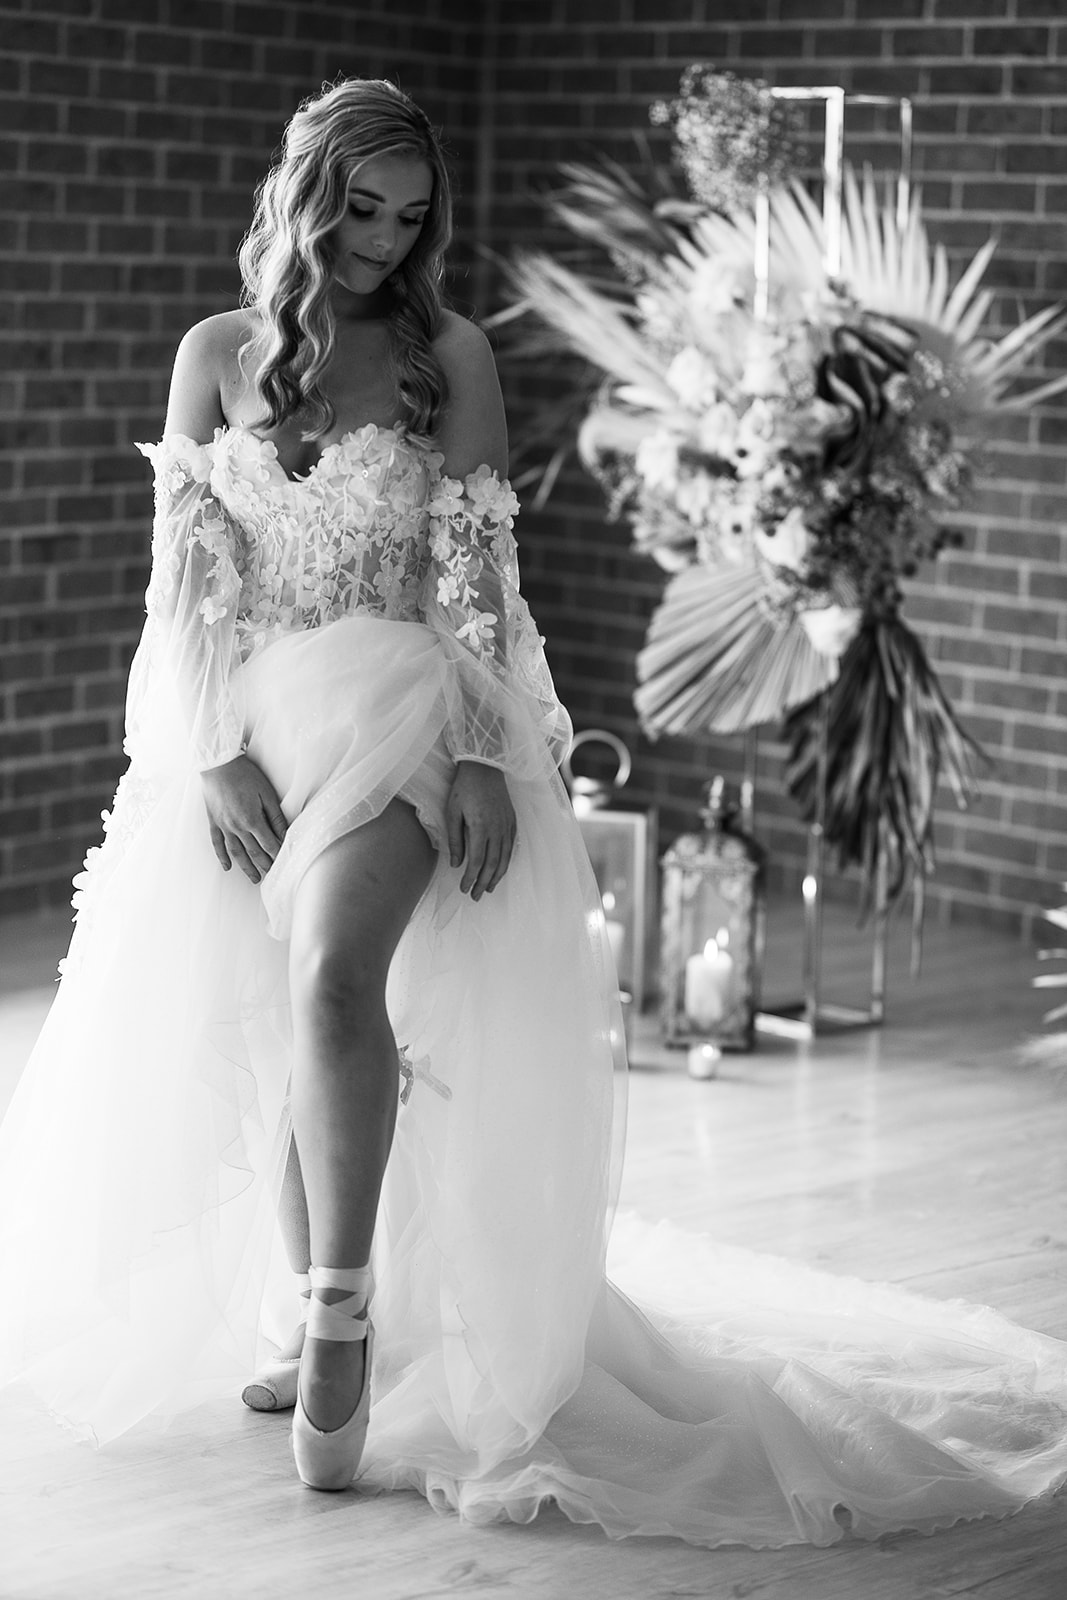 jennifer burch photography central coast weddings nsw bridal gowns floral design pinic setup cake